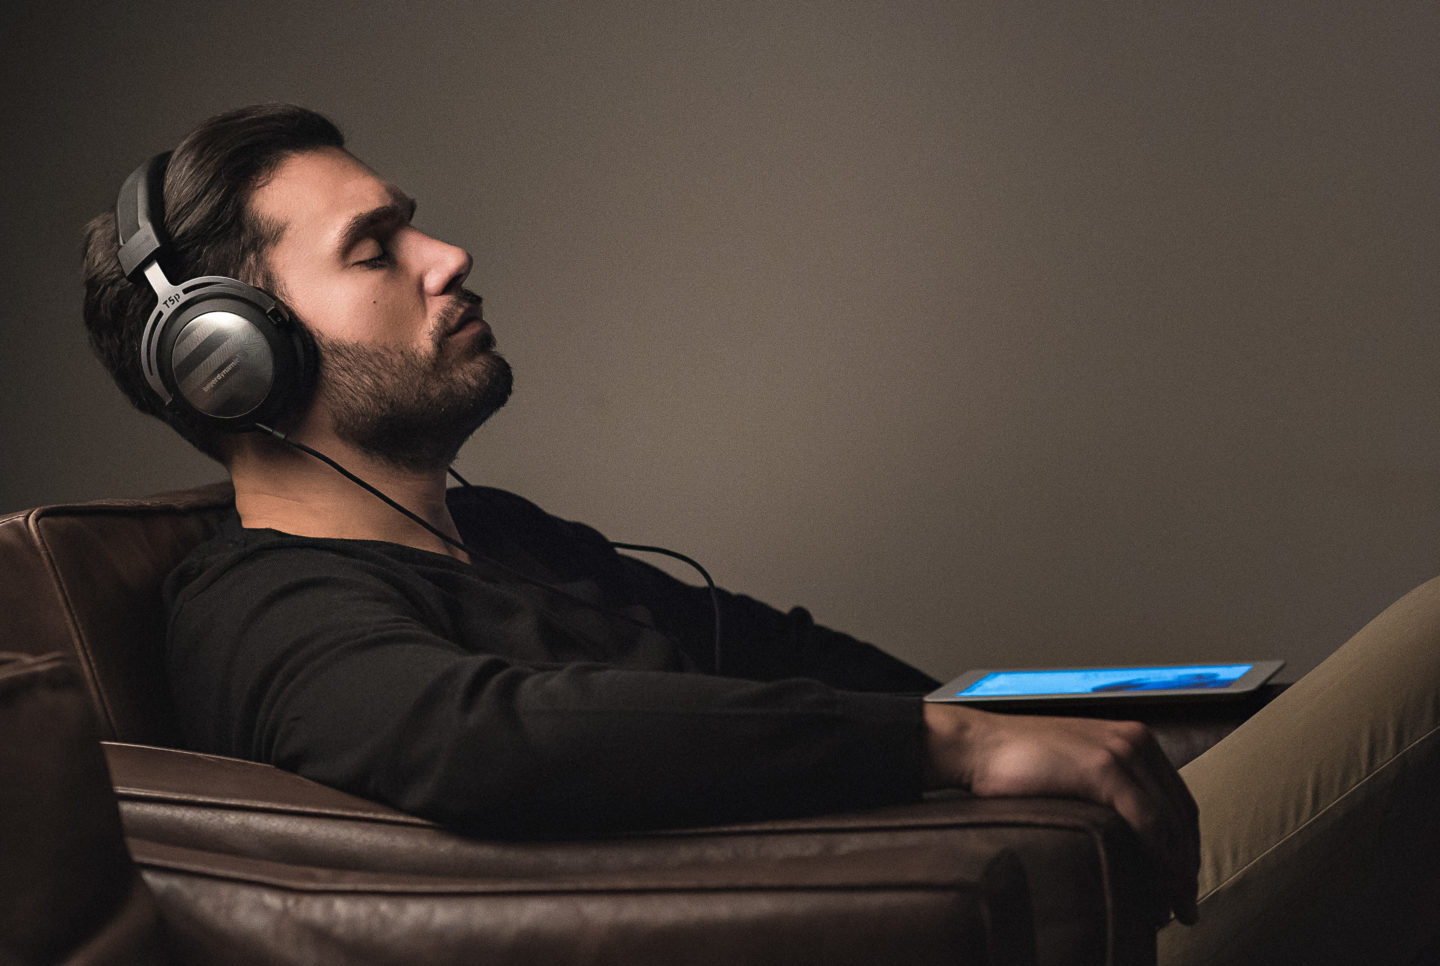 Guy listening to wired headphones on a couch